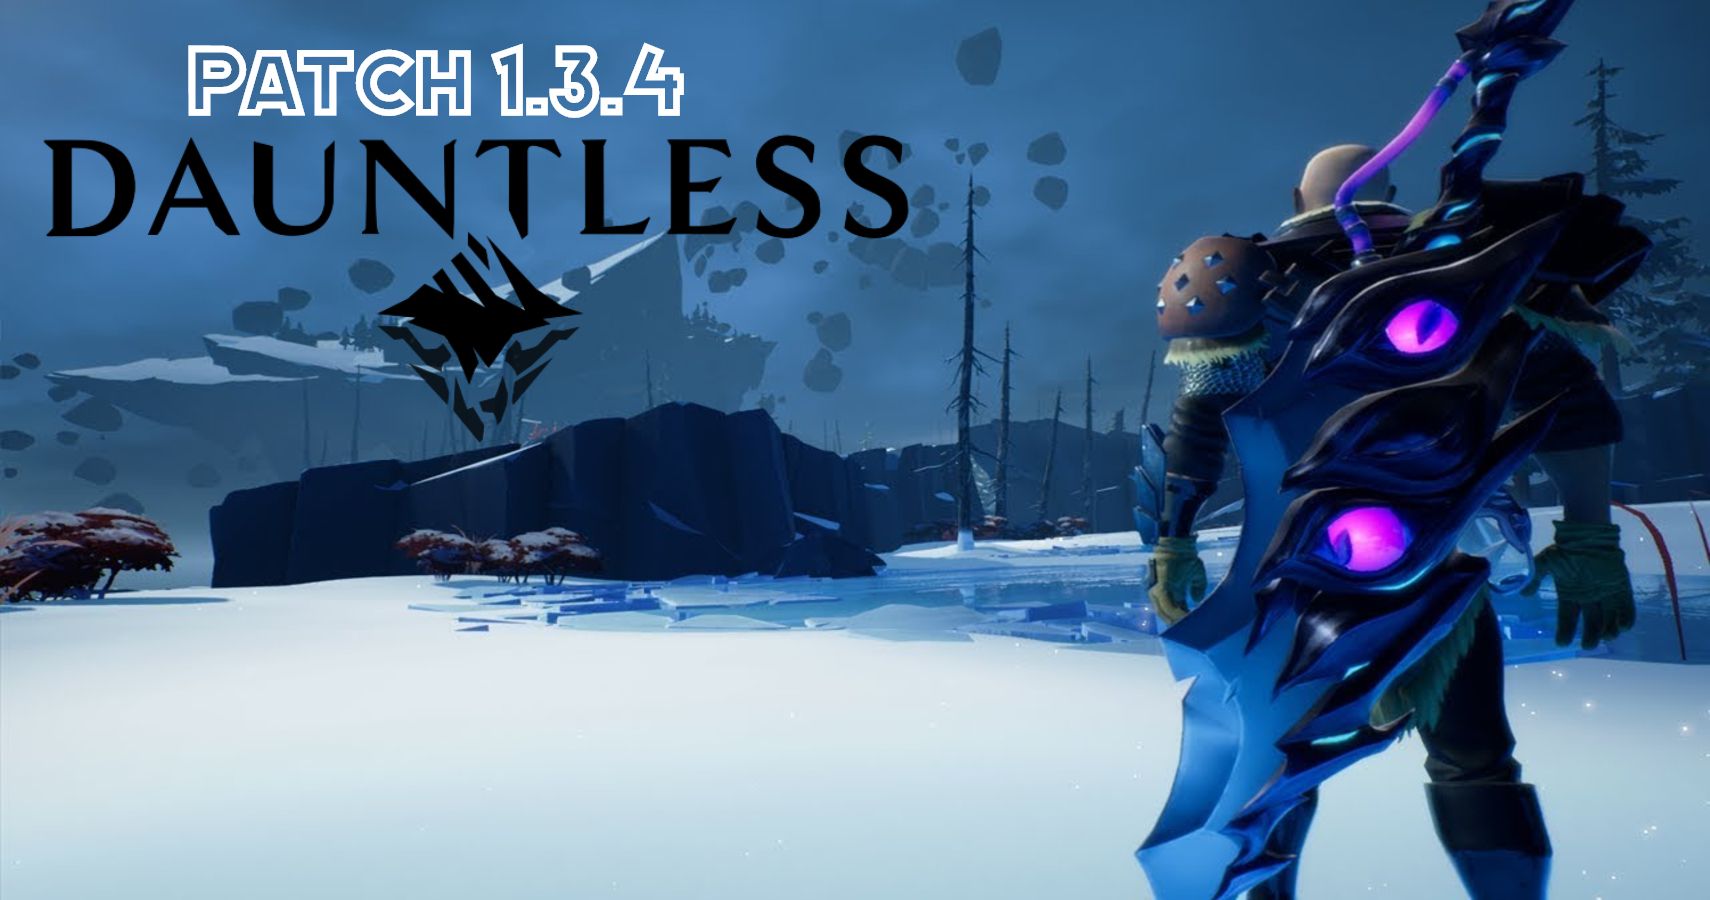 Dauntless Patch 134 Finally Brings FOV Sliders To Consoles